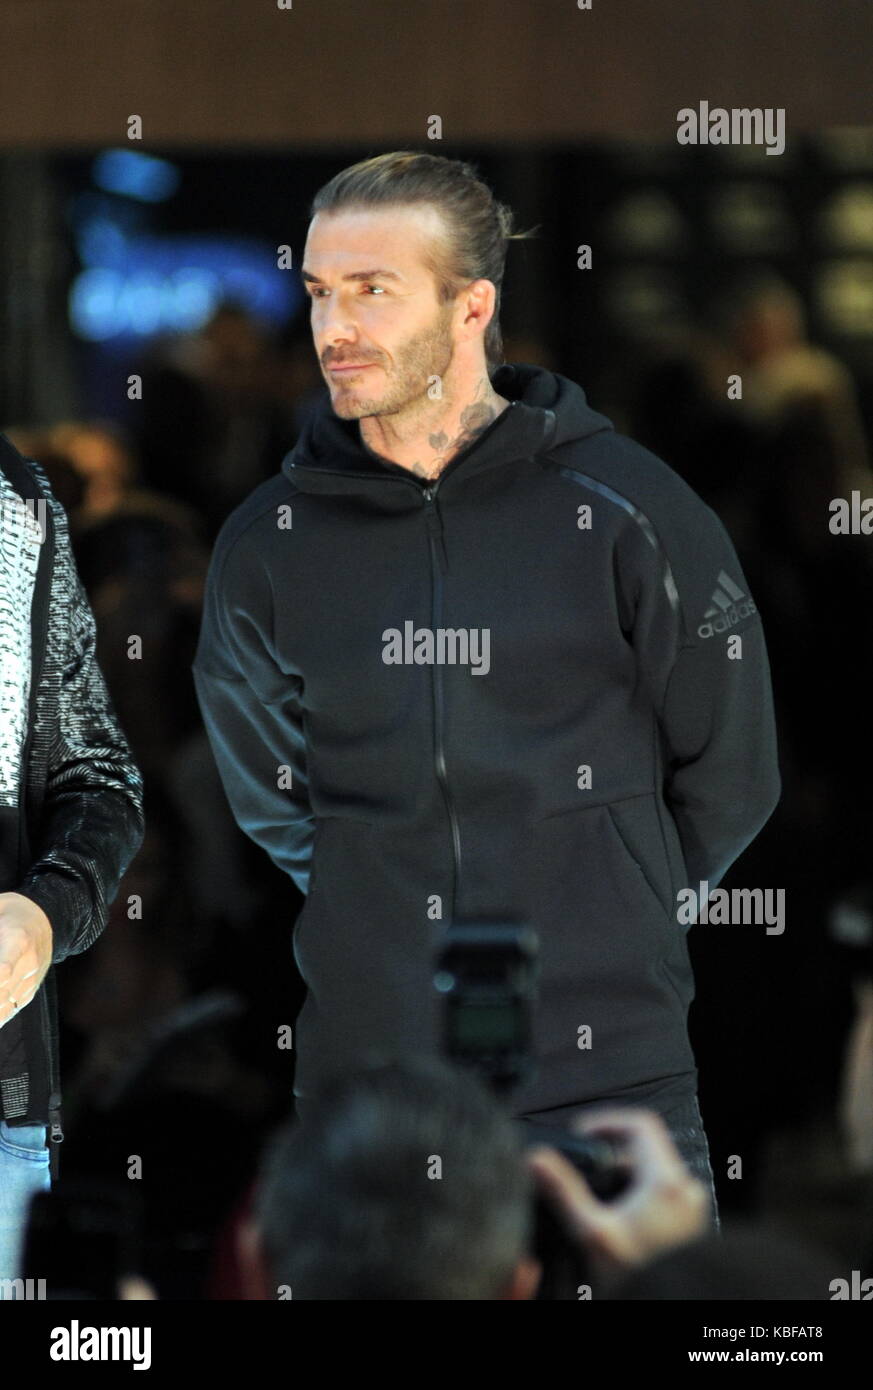 Milan, Italy. 29th Sep, 2017. David Beckham guest star at the Adidas store  The former English and national footballer DAVID BECKHAM comes to the  center of Milan as a guest of honor